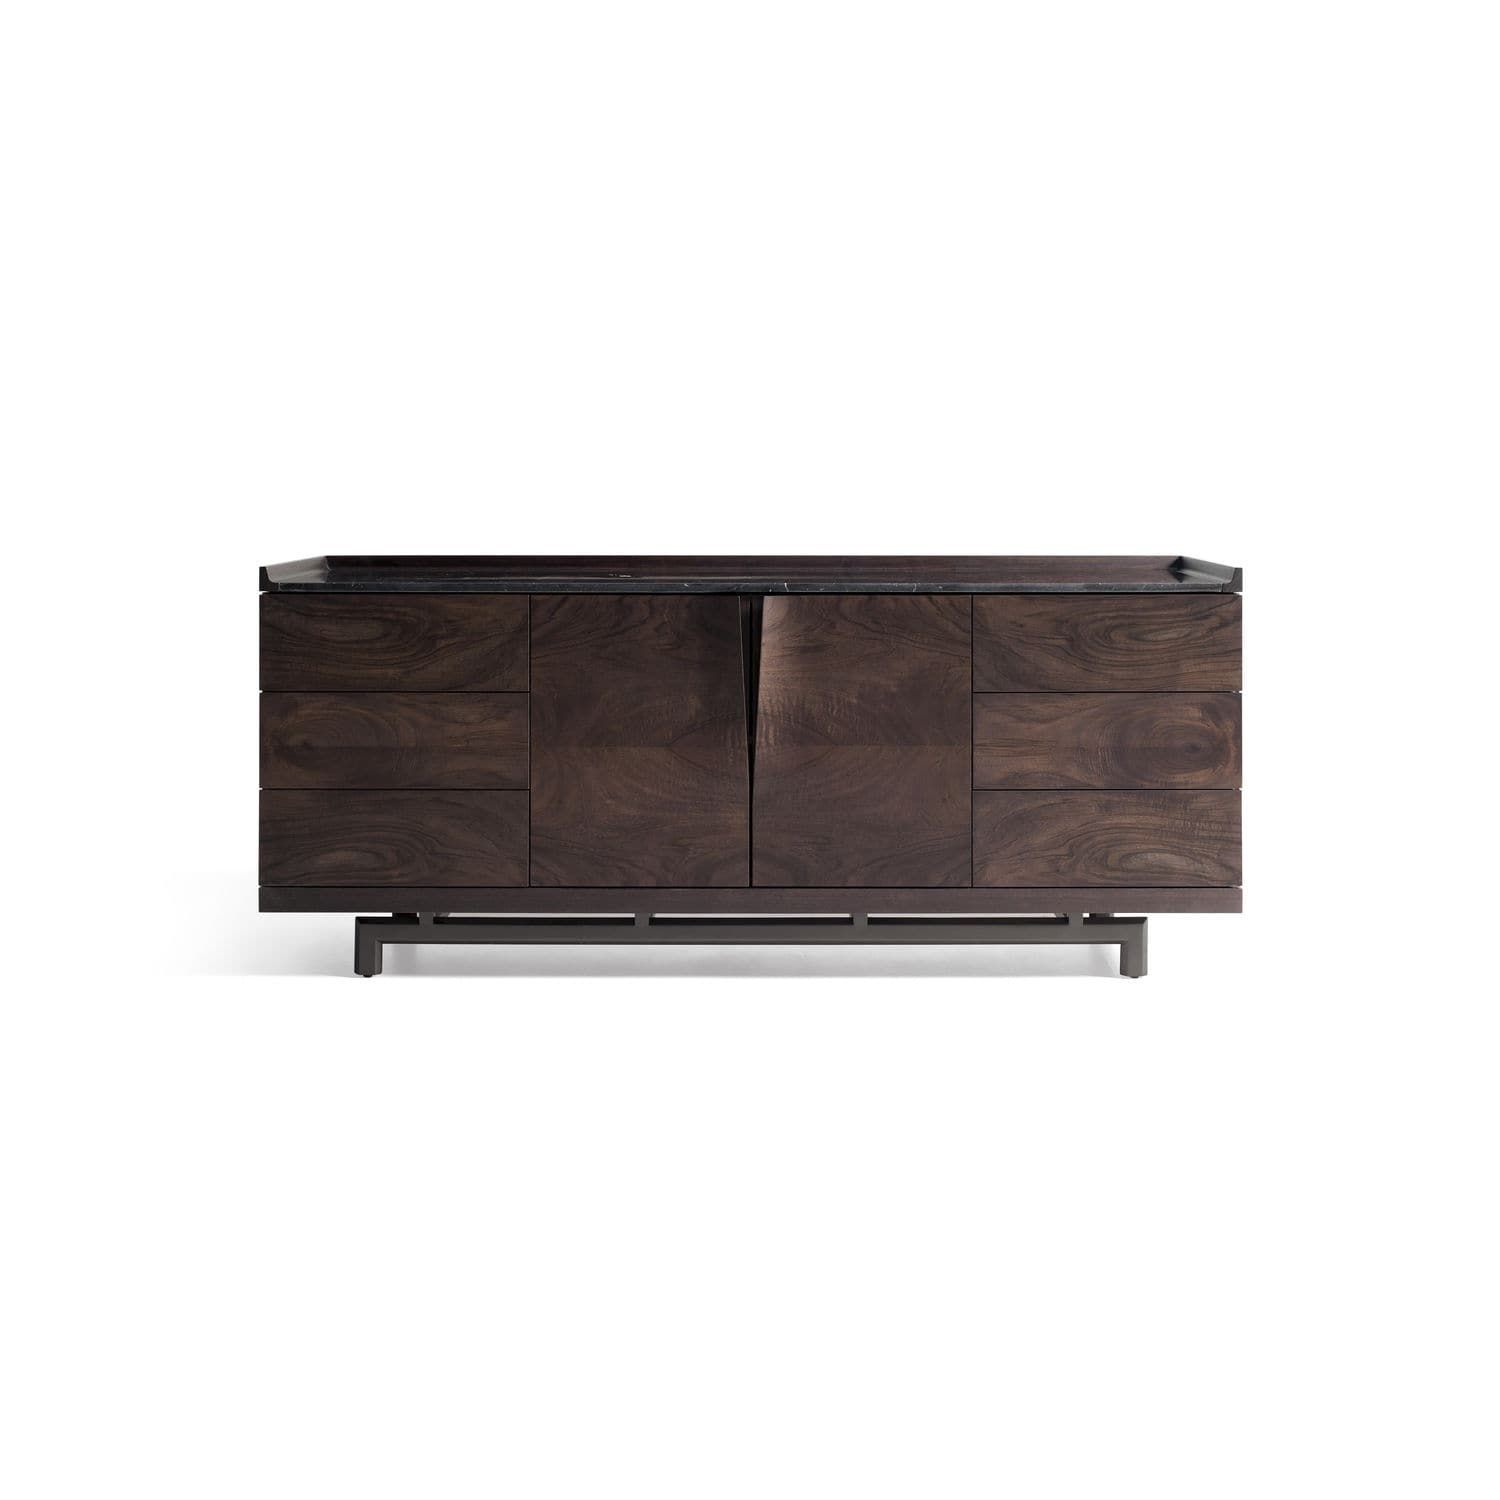 Contemporary Sideboard / Walnut / Contract – Alternative: Manta Within Most Popular Walnut Finish Contempo Sideboards (View 16 of 20)